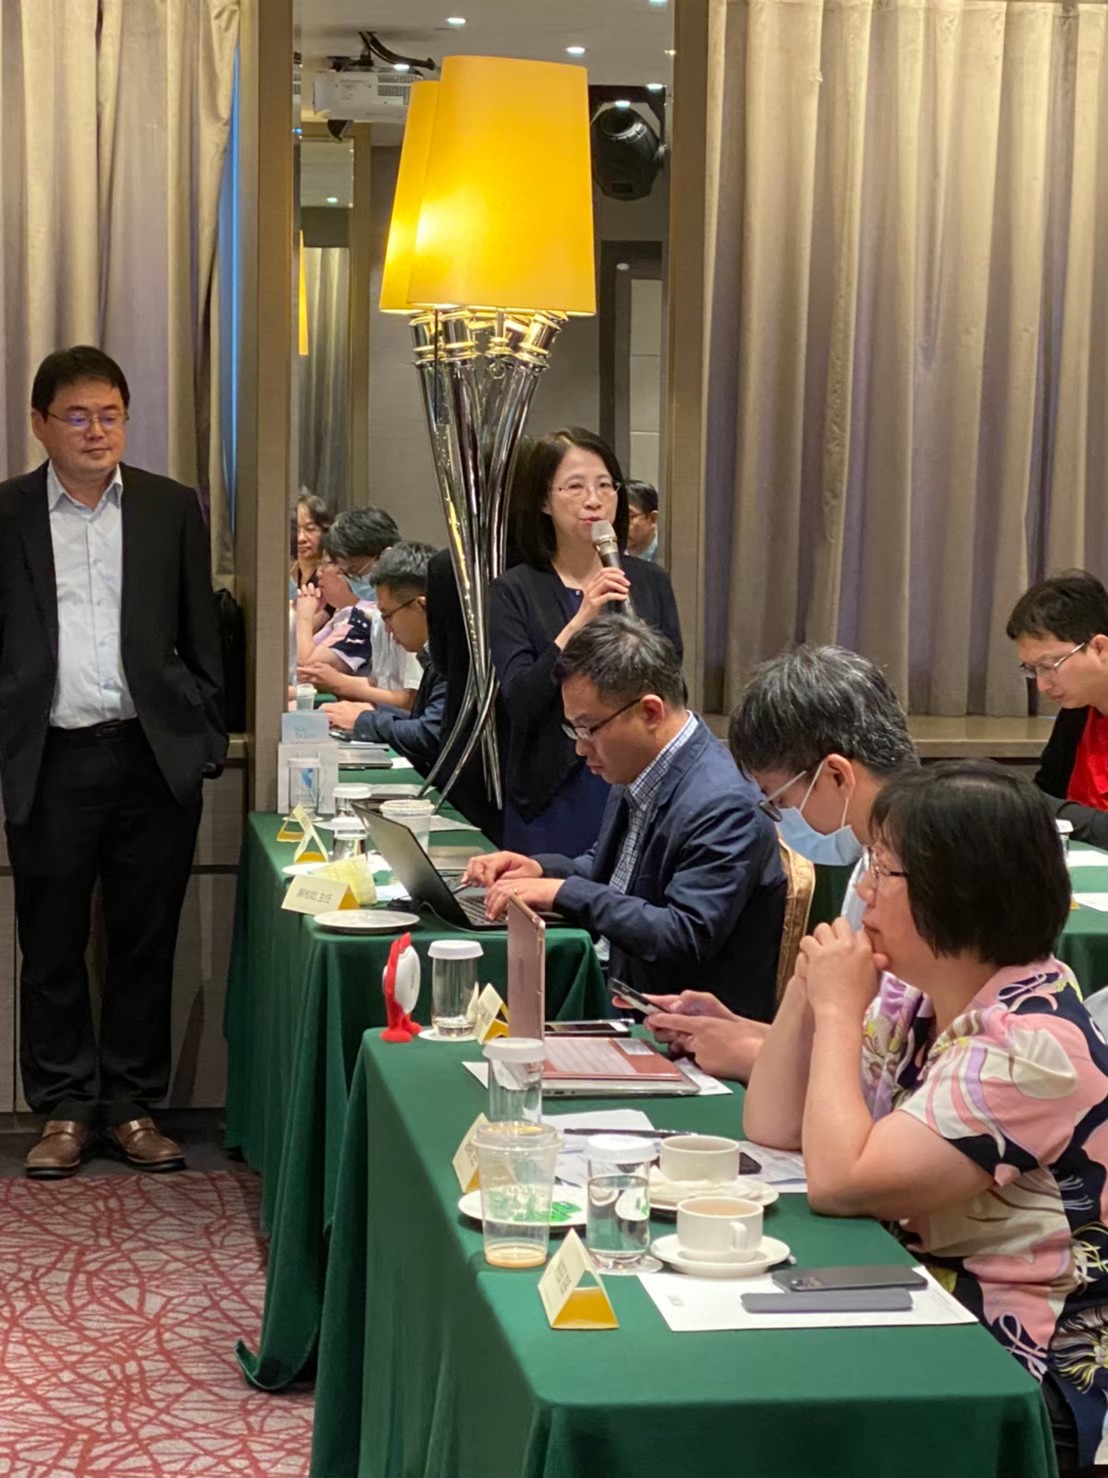 Over 130 Dermatologists attended our New Era of Atopic Dermatitis Treatment Symposium in Taichung city on July 5th, 2020